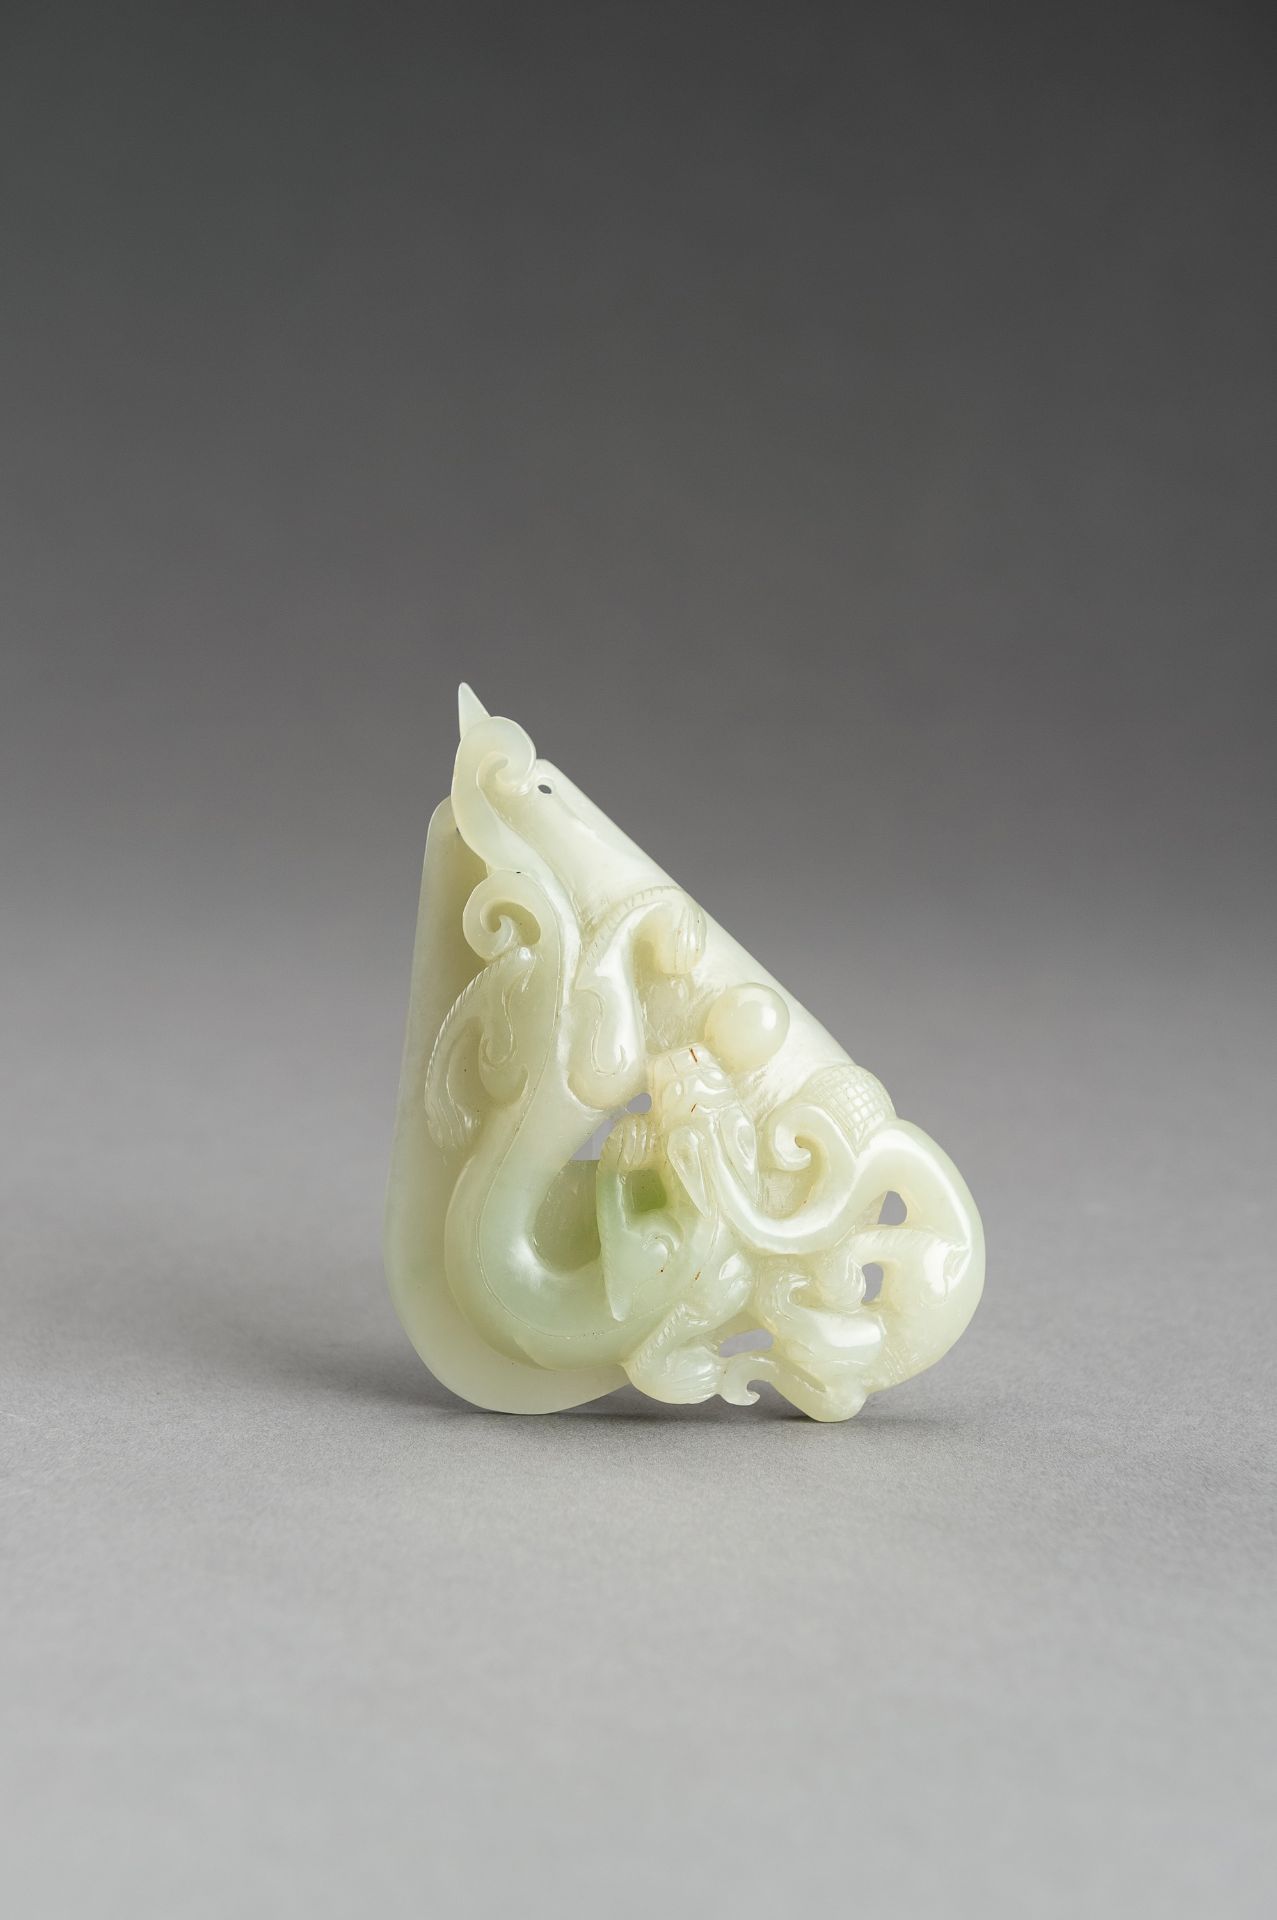 AN ARCHAISTIC PALE CELADON JADE PENDANT OF A CHILONG, 1920s - Image 11 of 14